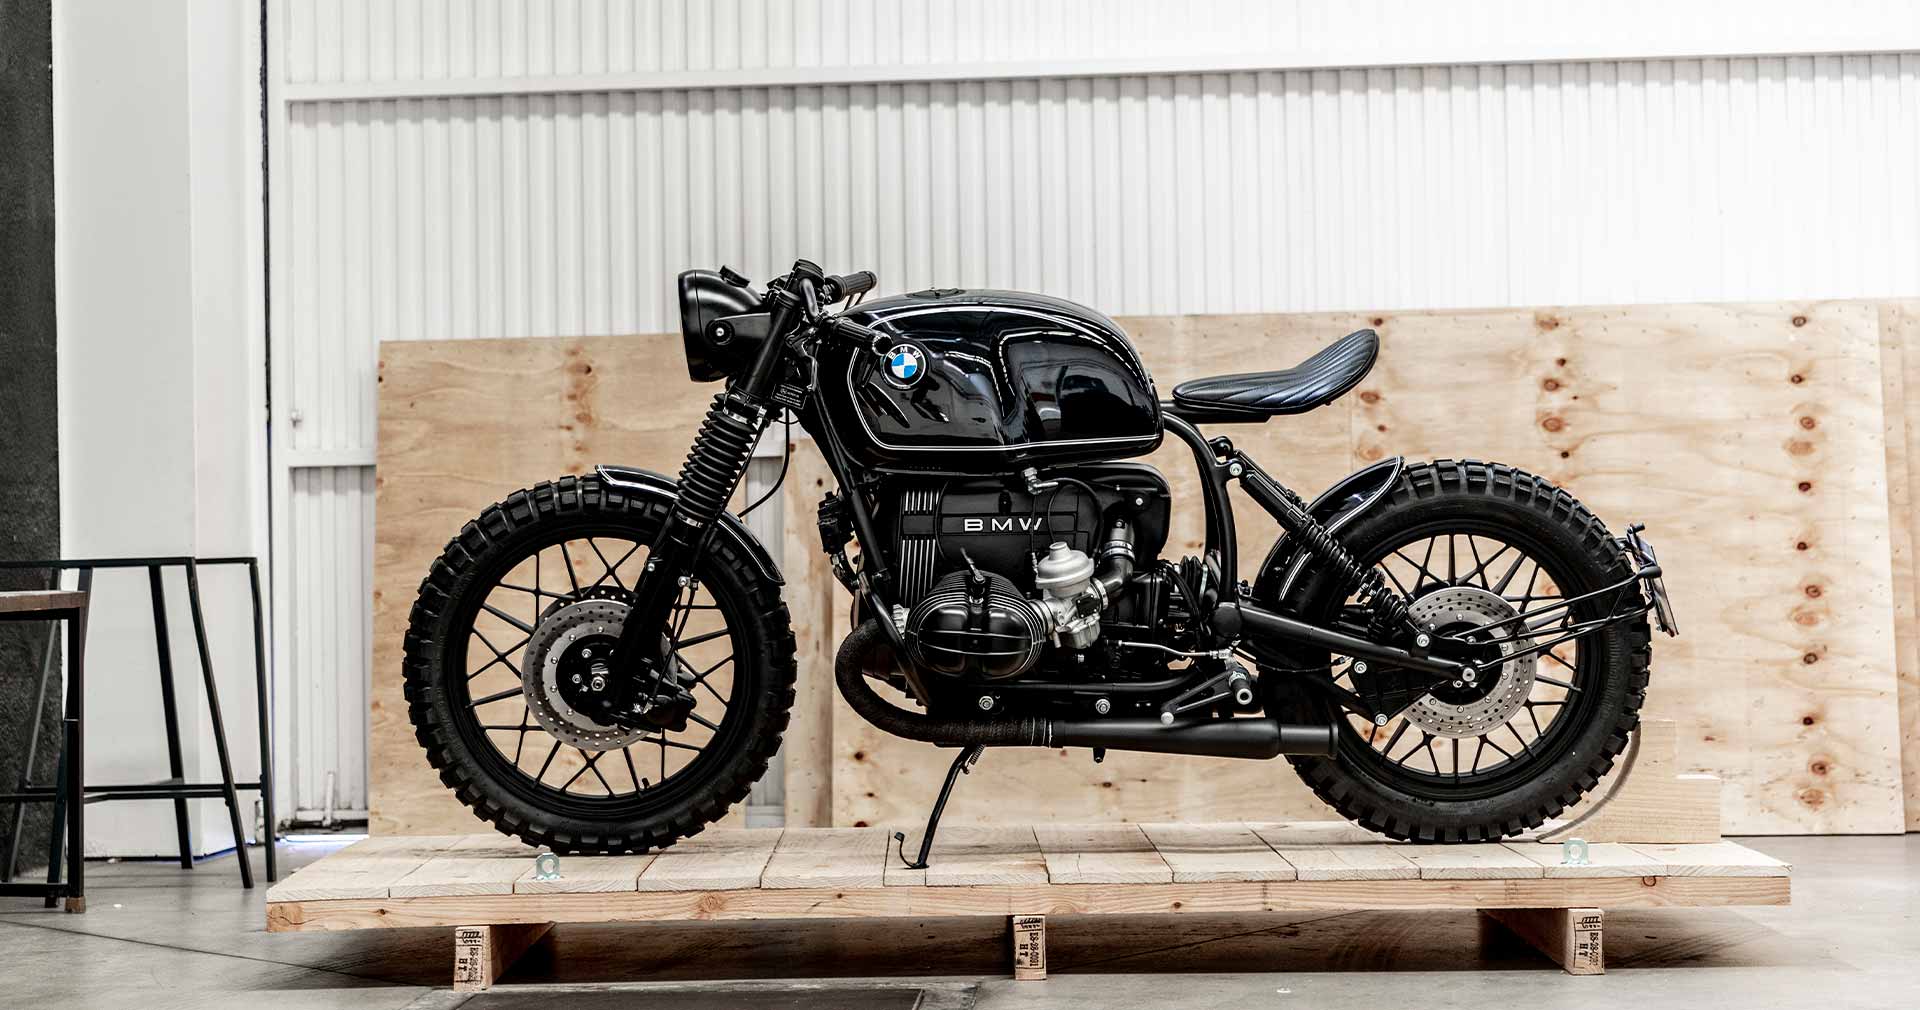 crd126 - shipping bikes worldwide - caferacerdreams